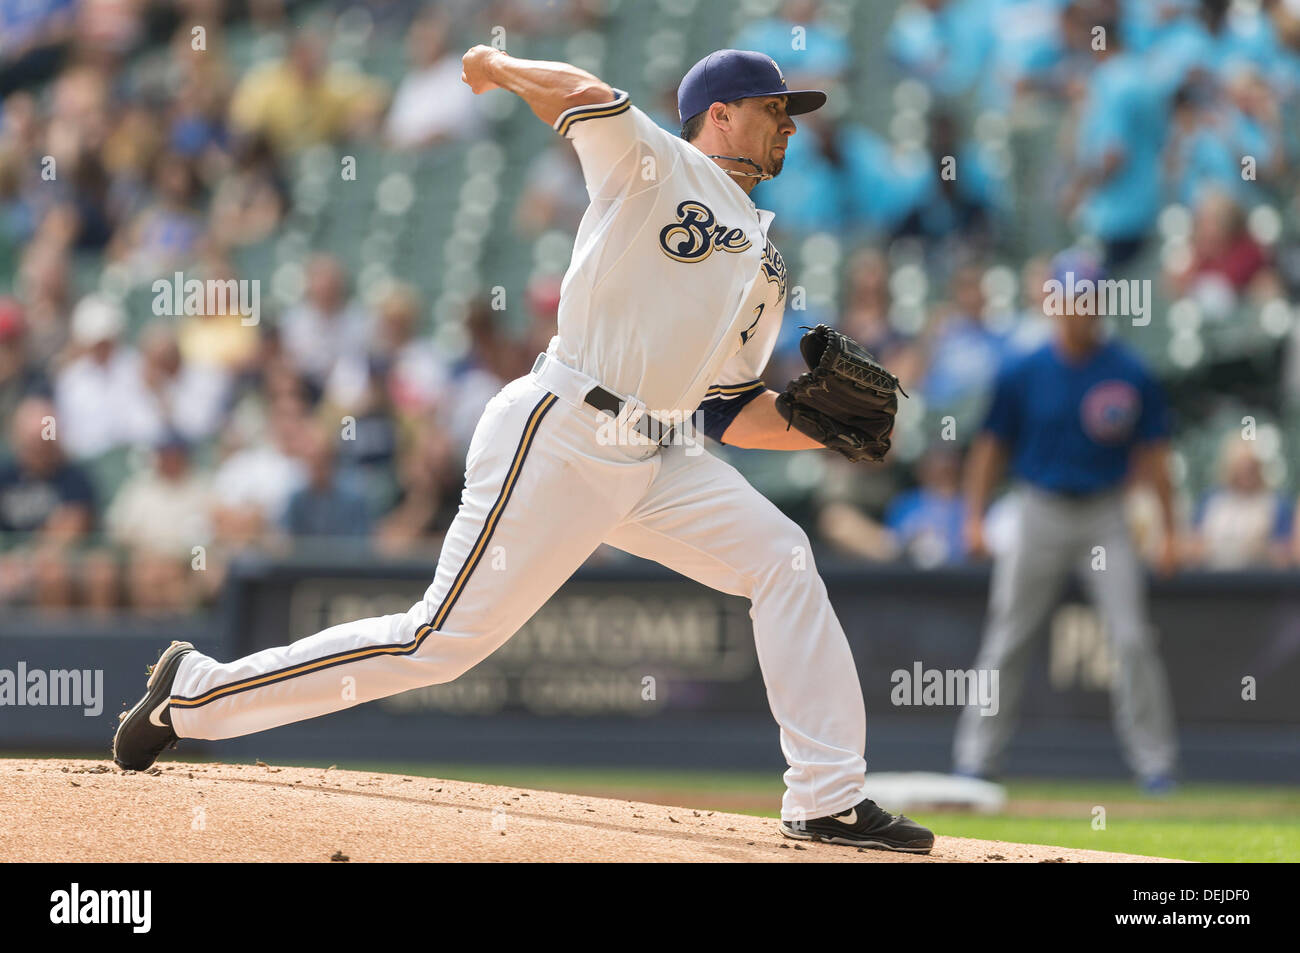 Milwaukee, Wisconsin, USA. 19th Sep, 2013. September 19th, 2013: Milwaukee Brewers starting pitcher Kyle Lohse #26 throws a pitch in the 1st inning of the Major League Baseball game between the Milwaukee Brewers and the Chicago Cubs at Miller Park in Milwaukee, WI. John Fisher/CSM/Alamy Live News Stock Photo